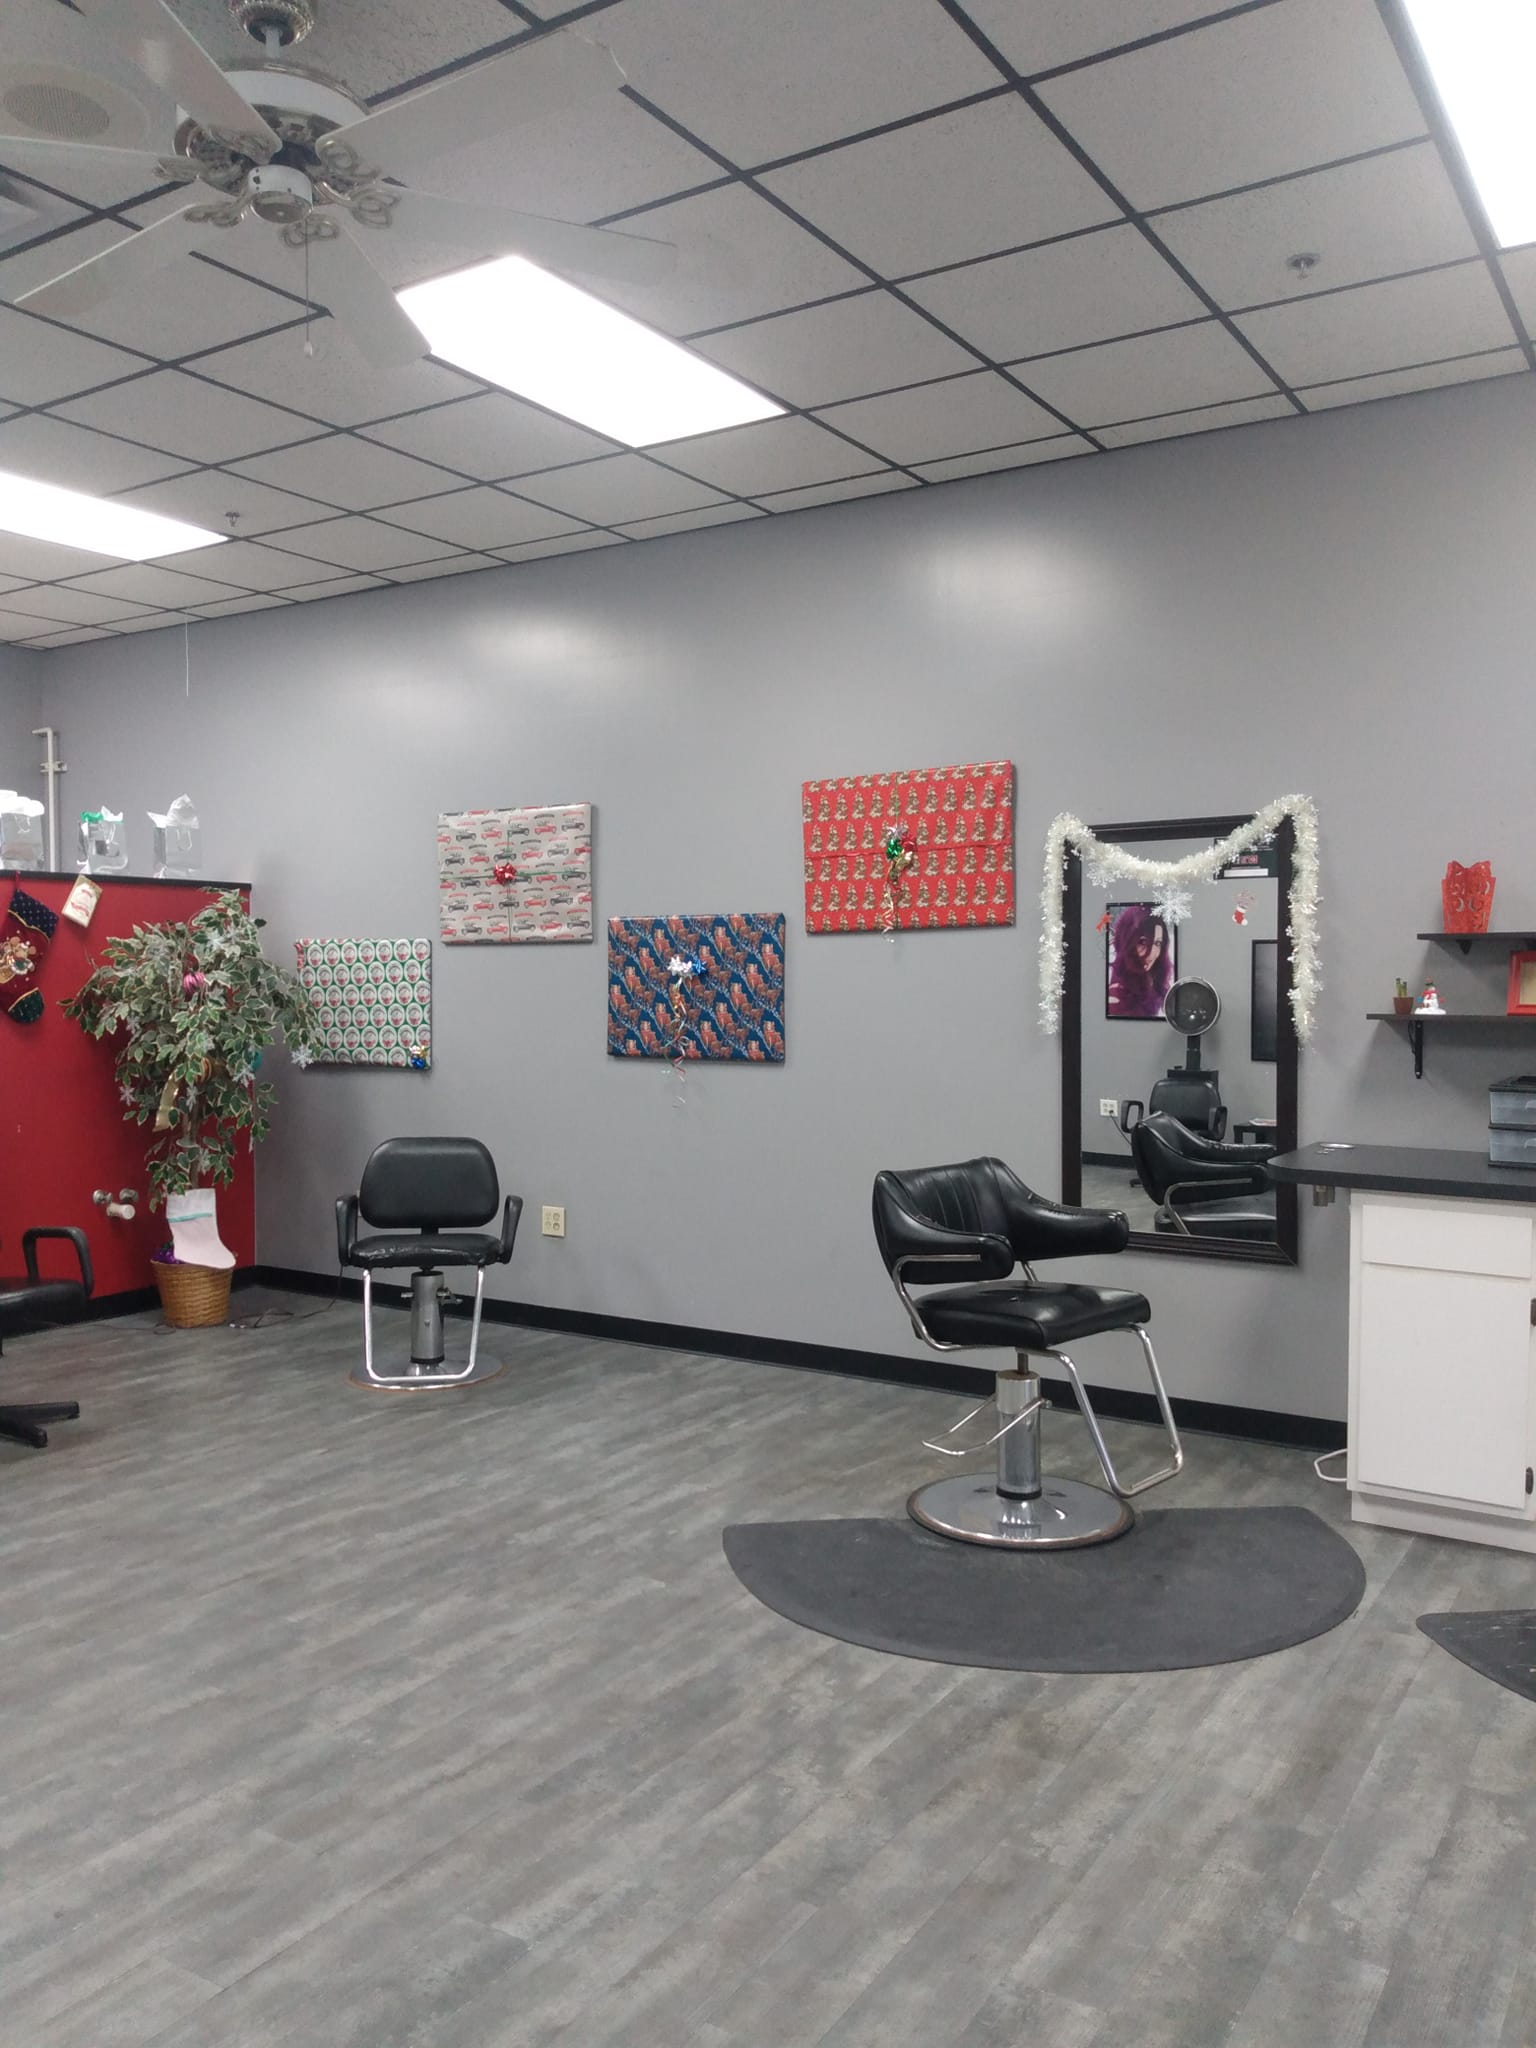 Grondin's Hair Center 10348 S Clare Ave, Clare Michigan 48617